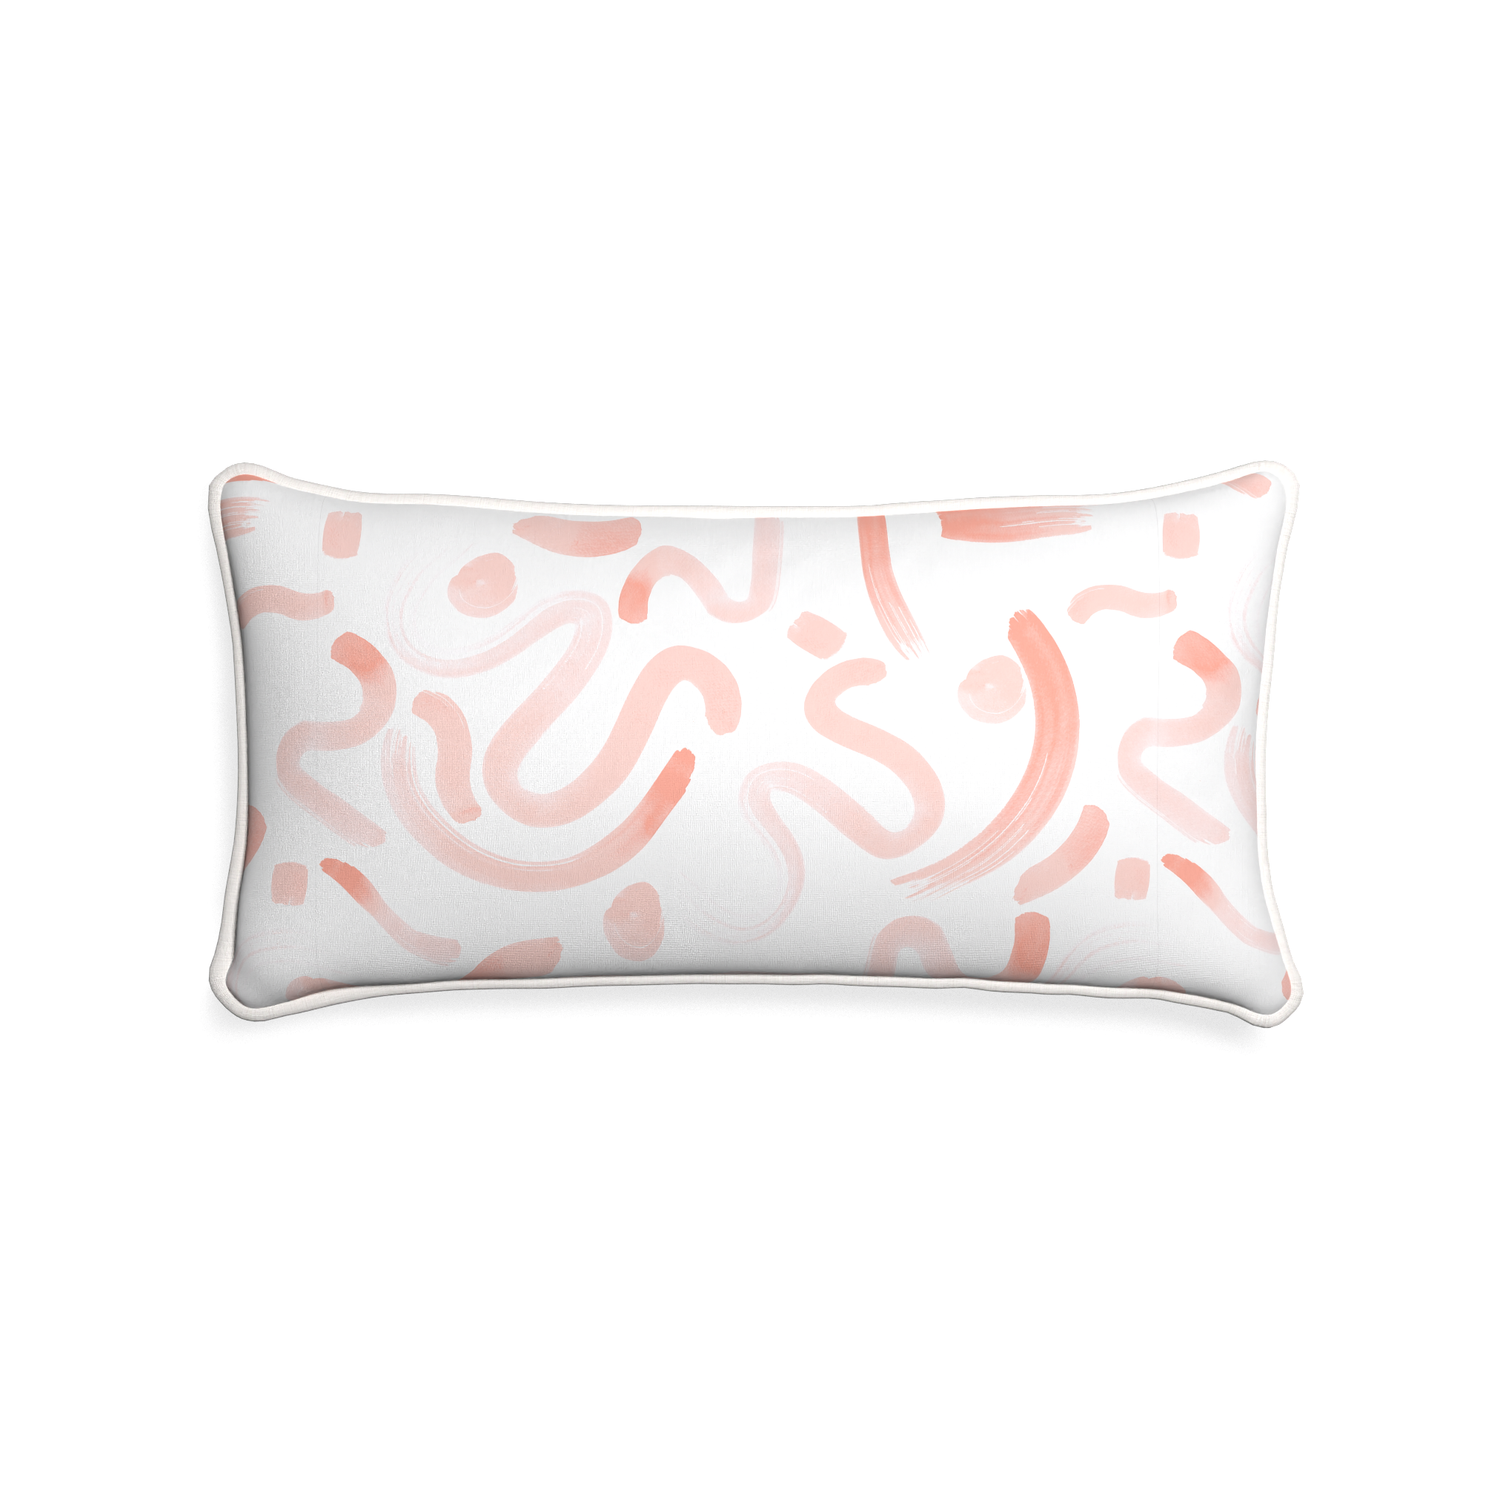 Midi-lumbar hockney pink custom pink graphicpillow with snow piping on white background